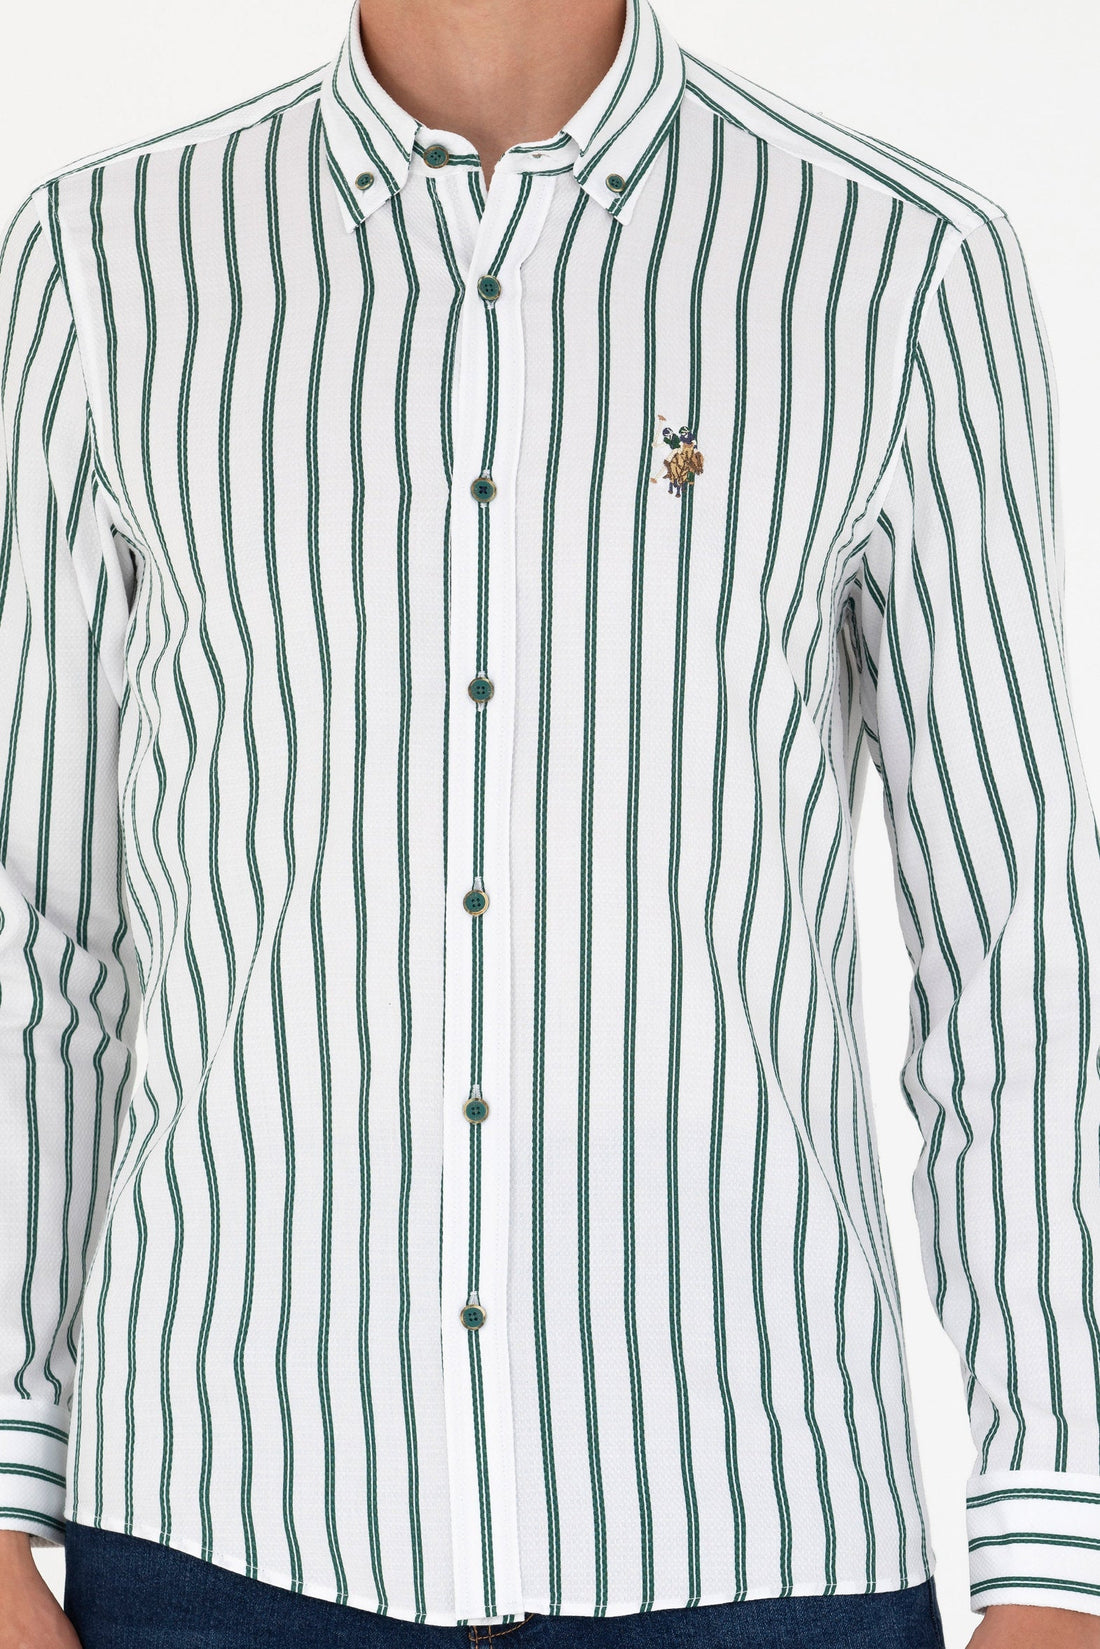 White Shirt With Green Stripes And Logo_G081SZ0040 1763446_VR054_02